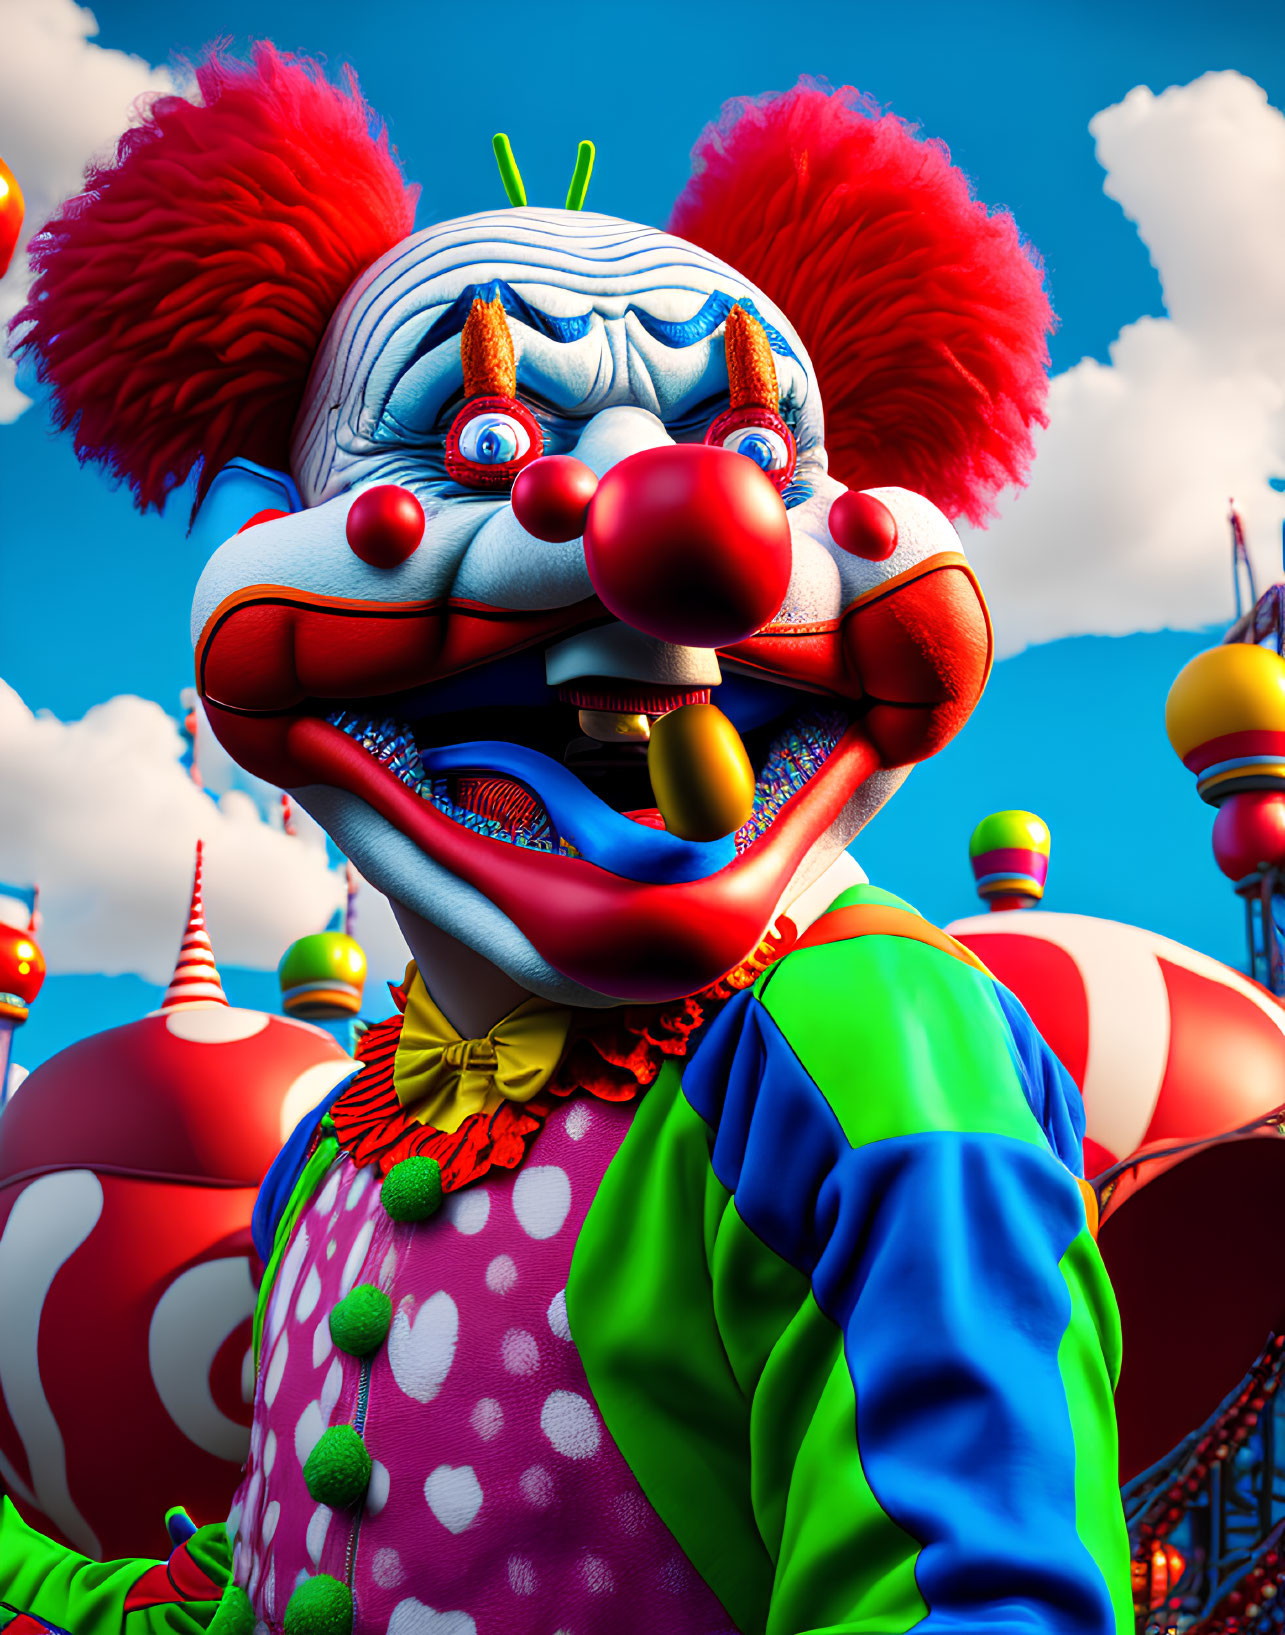 Colorful 3D clown illustration with menacing expression in funfair setting